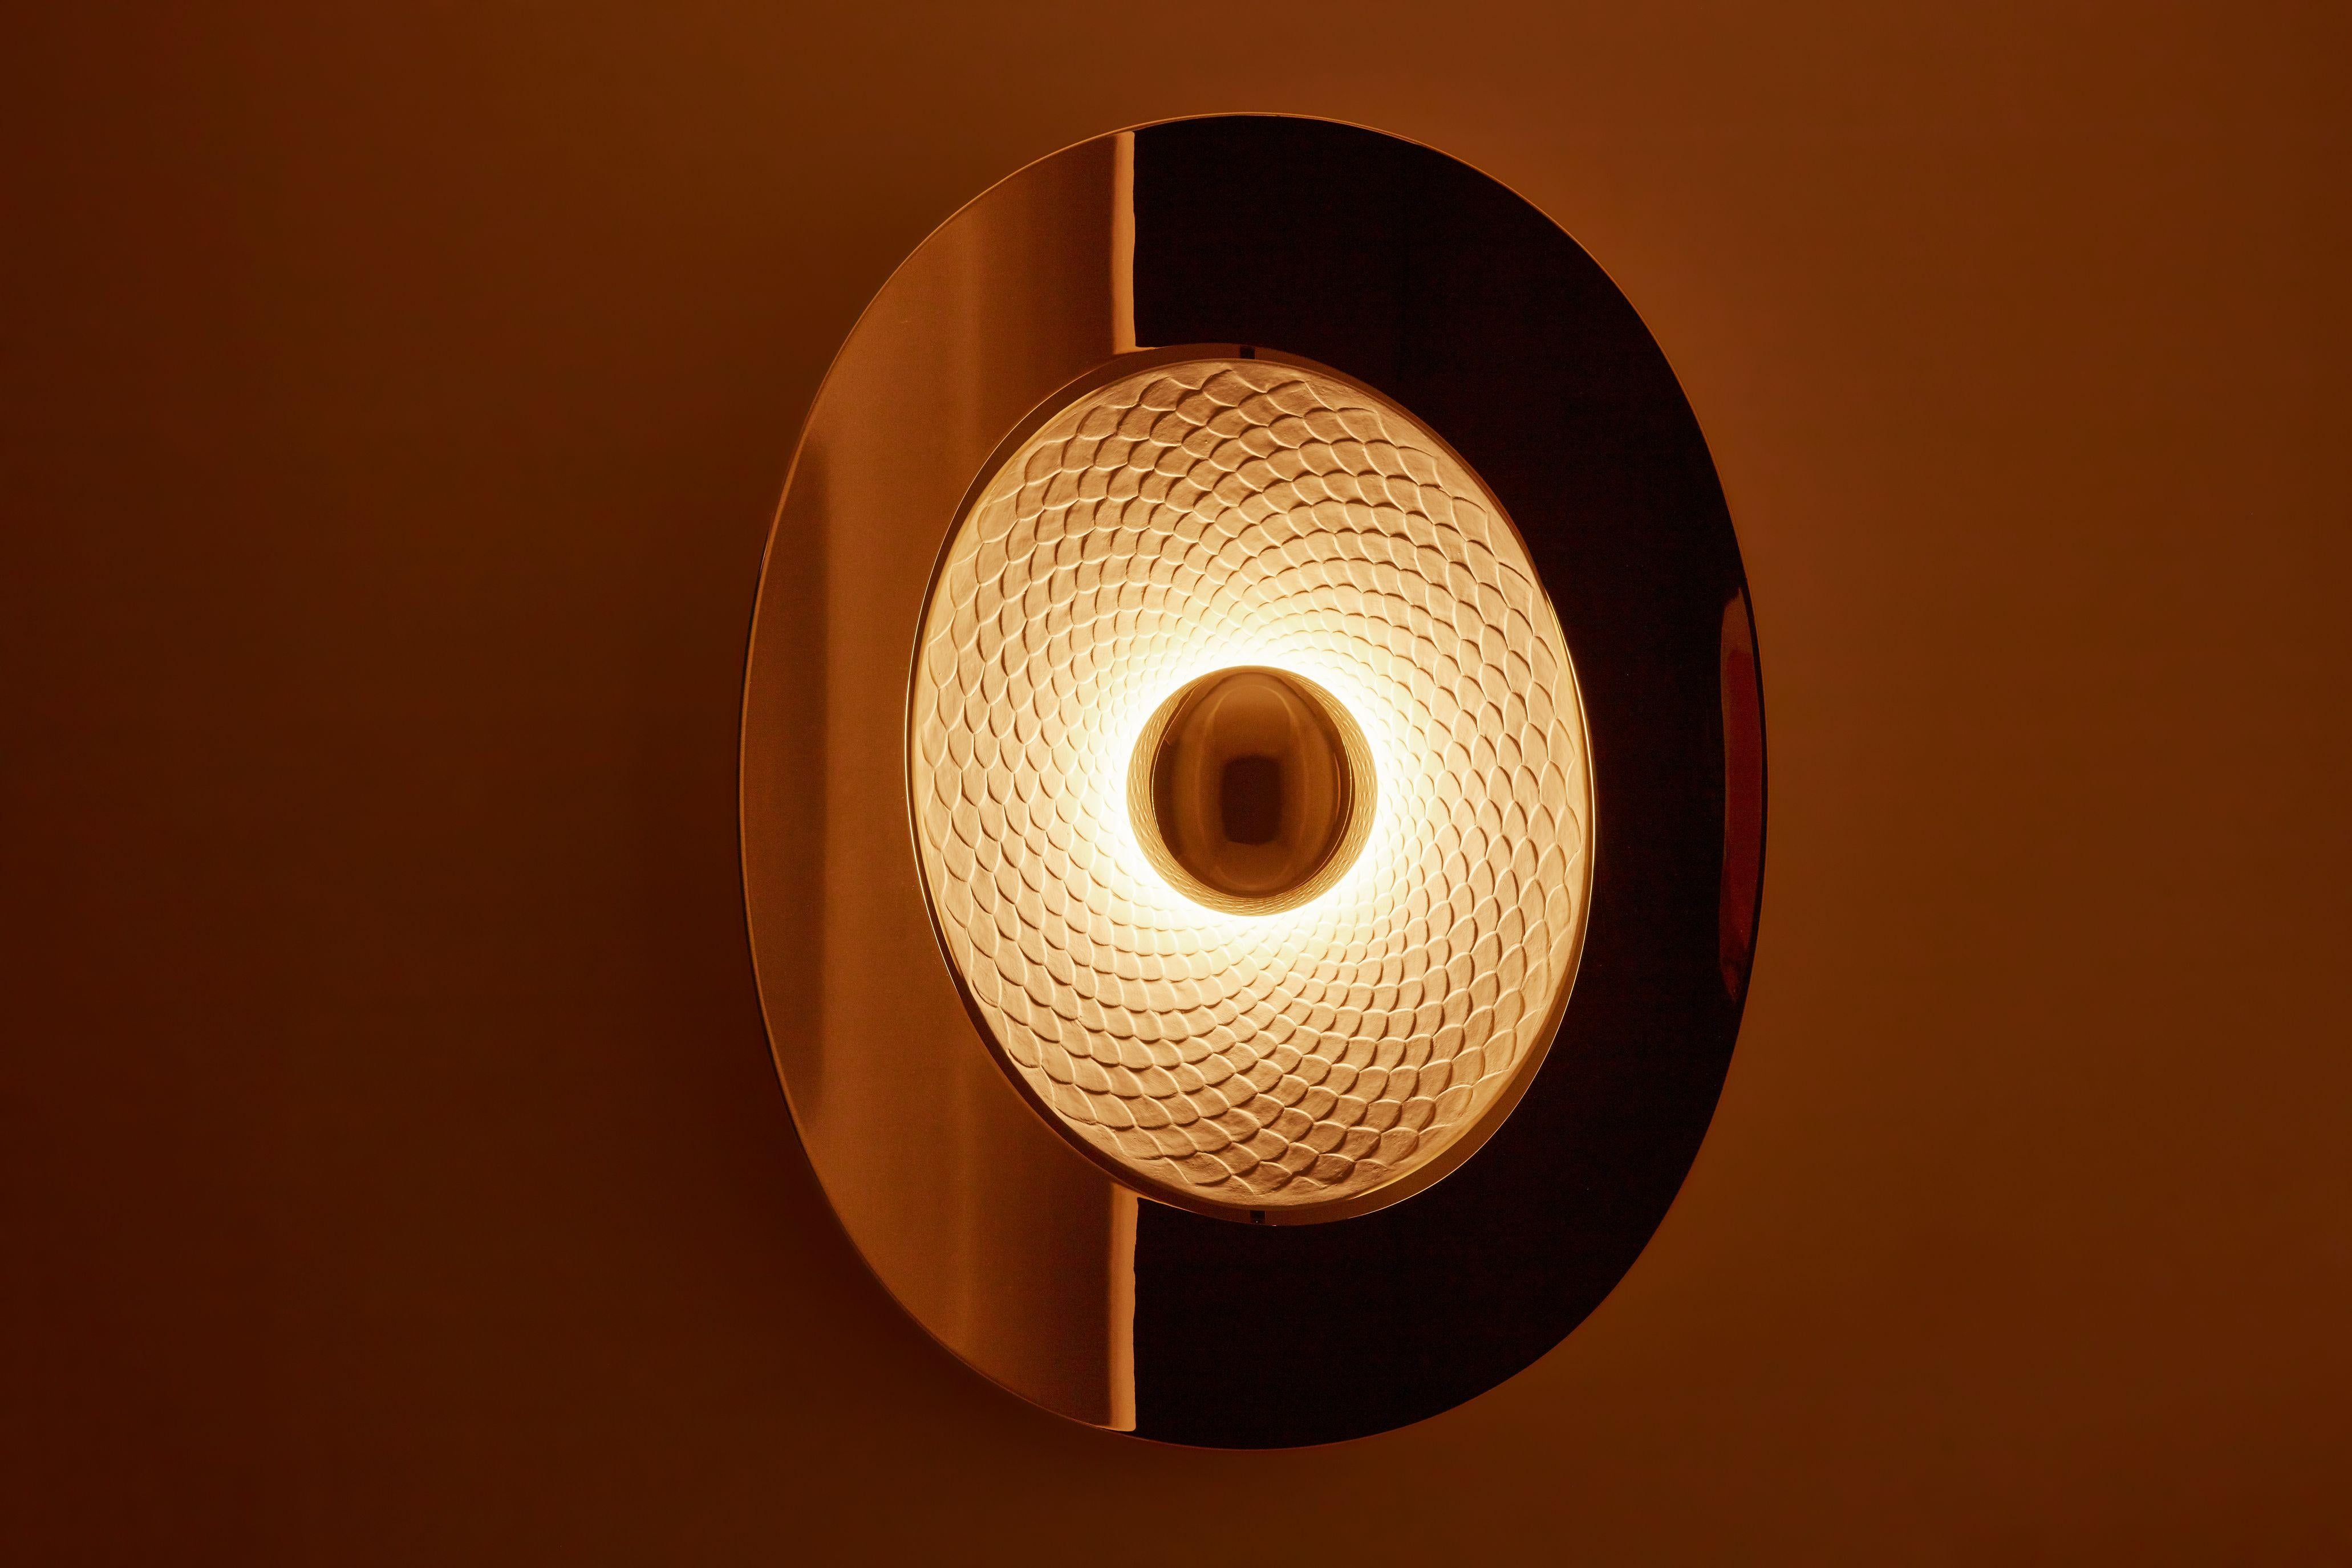 Ryu wall lamp by MYDRIAZ
Dimensions: W 53.4 x H 65.3 x D 8 cm
Materials: Brass, plaster
Finishes: Golden-plated, polished brass, white nickel finish, on polished brass, black nickel finish on
polished brass

All our lamps can be wired